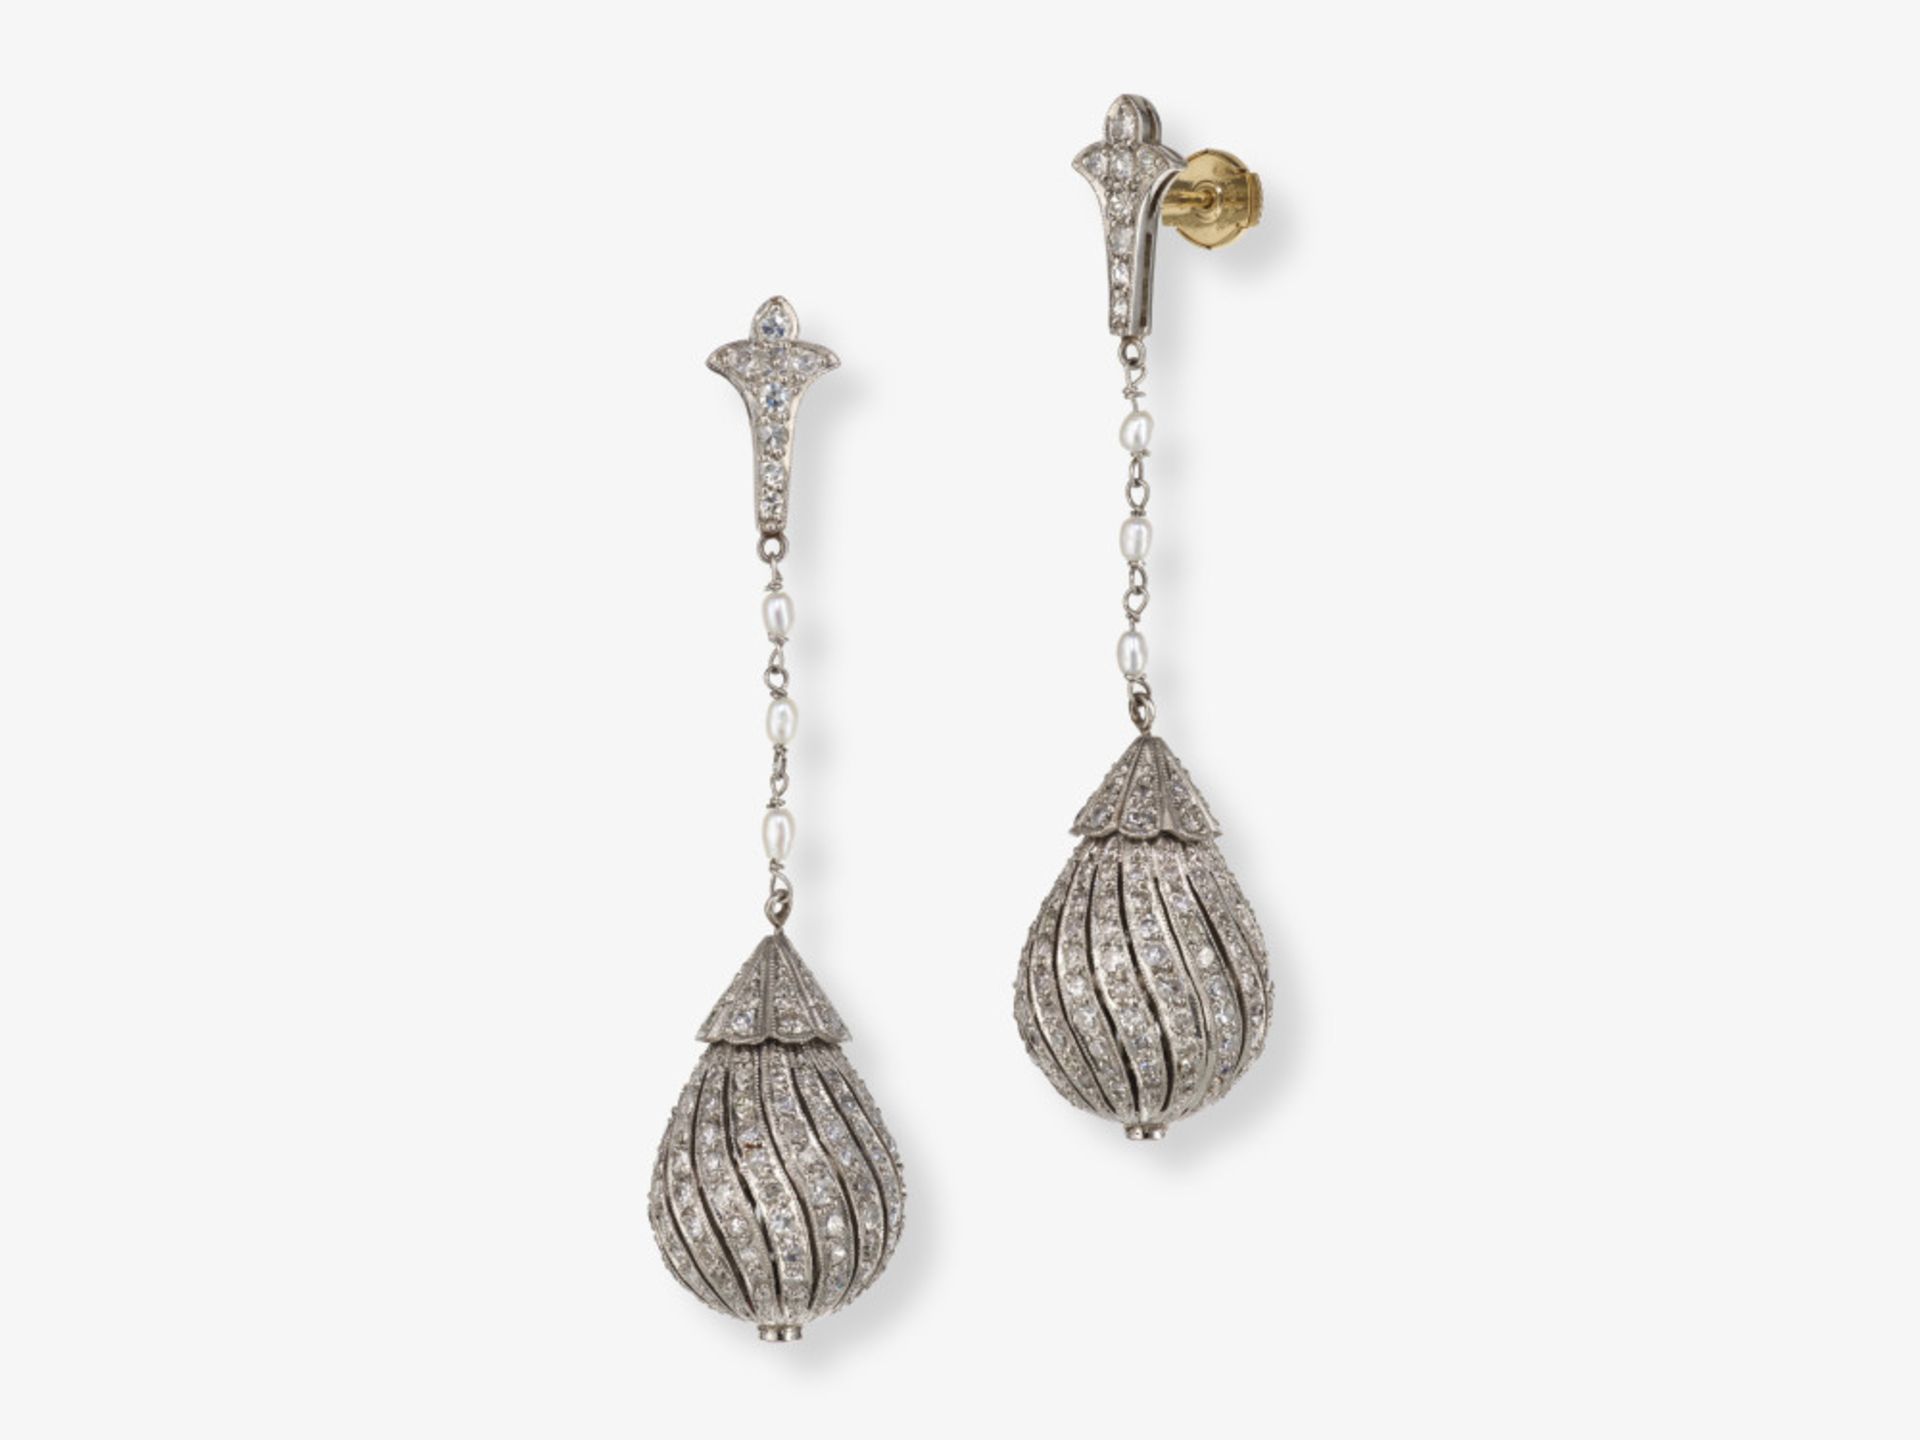 Historical drop earrings decorated with small river pearls and diamonds - Image 2 of 2